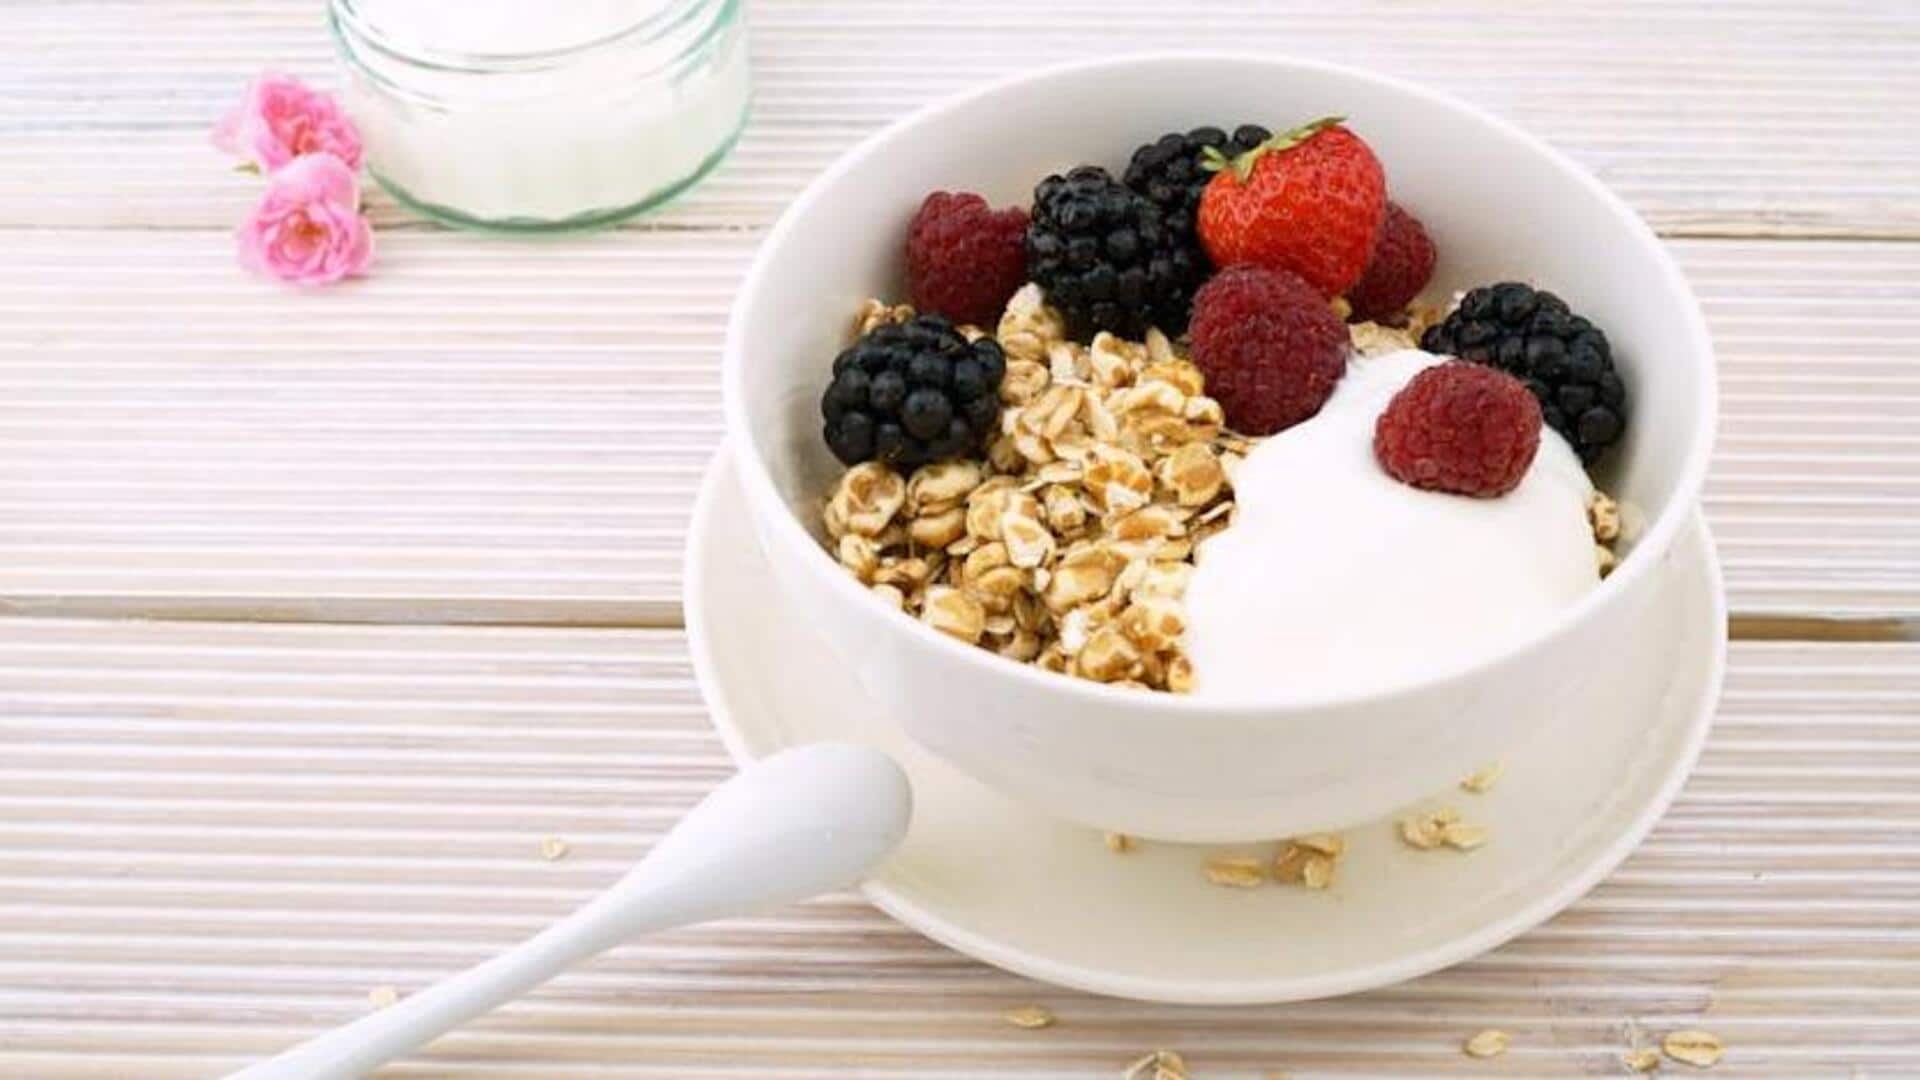 Add these delicious vegan yogurt bowls to your daily diet